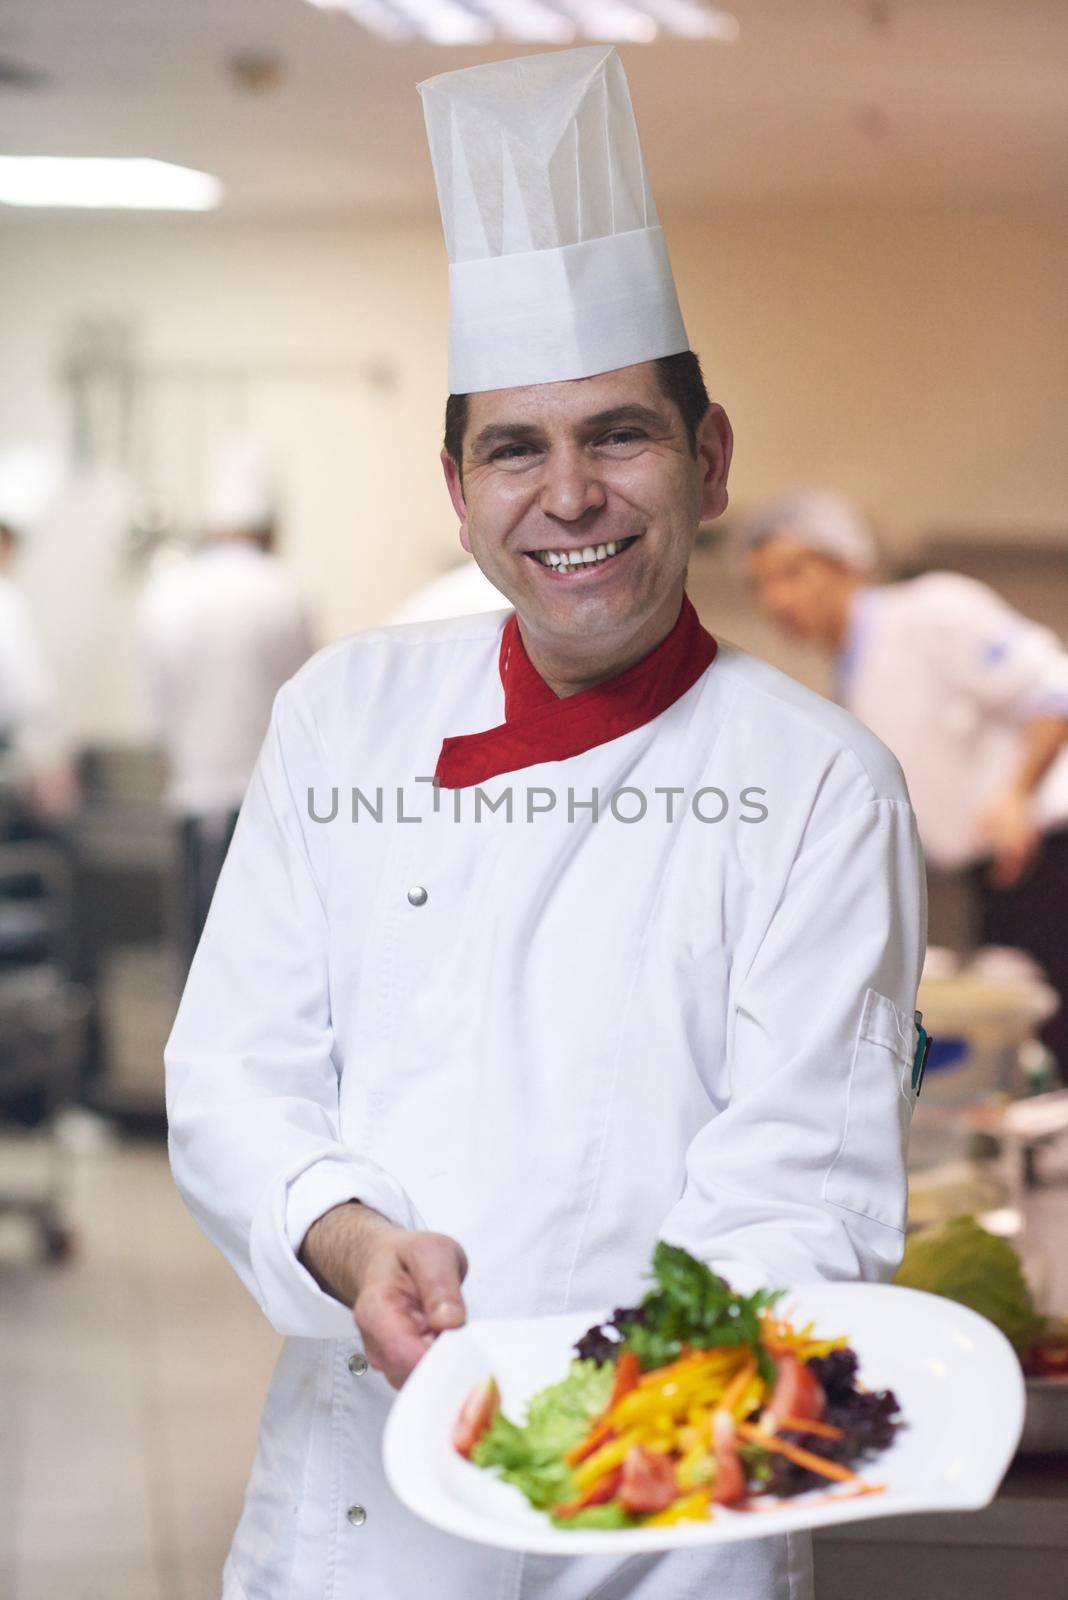 chef in hotel kitchen preparing and decorating food, delicious vegetables and meat  meal dinner